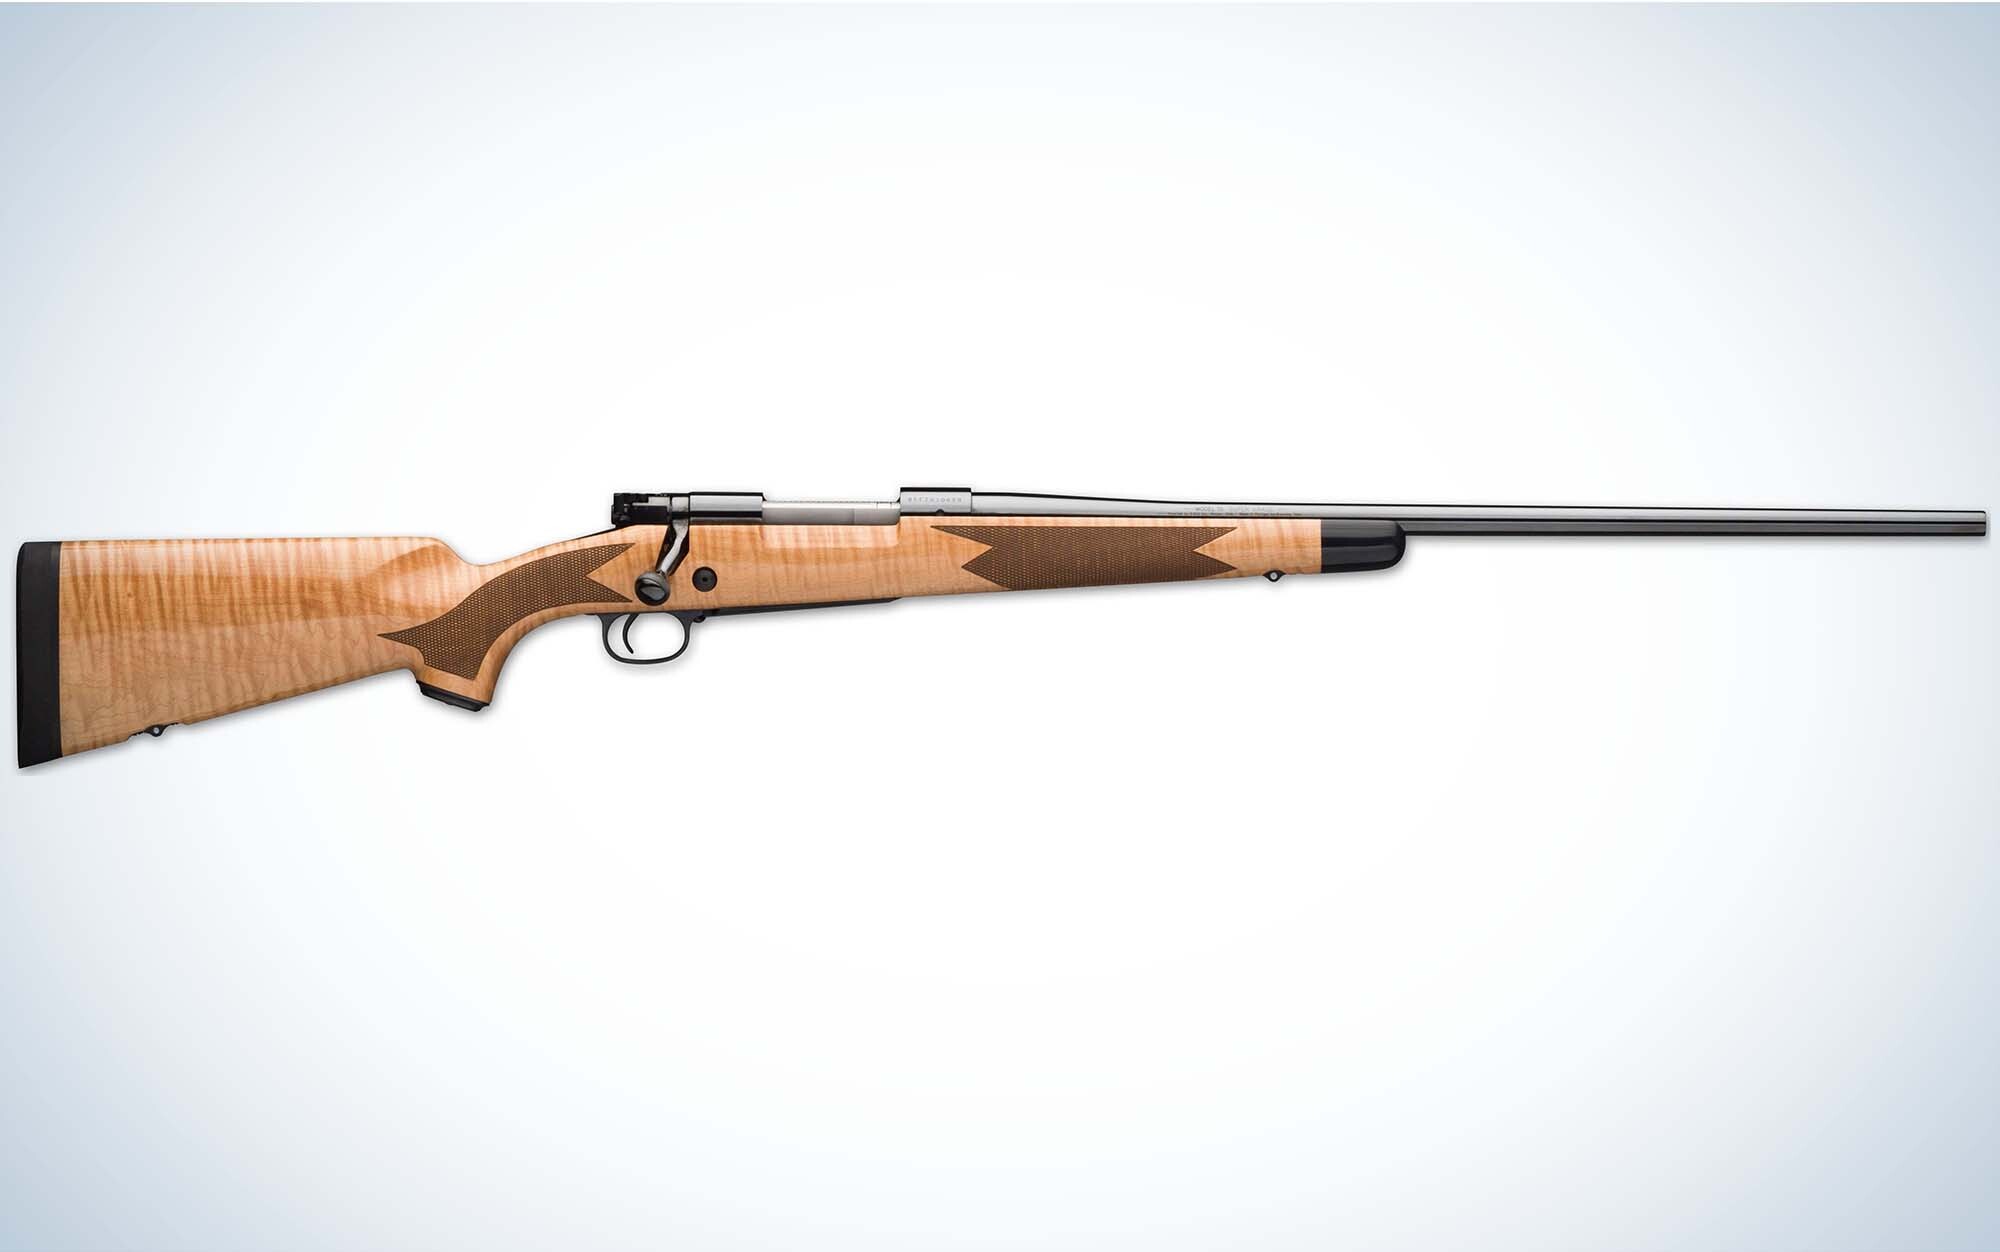 The Winchester Model 70 Supergrade is the best deer hunting rifle for keeping as a family heirloom.